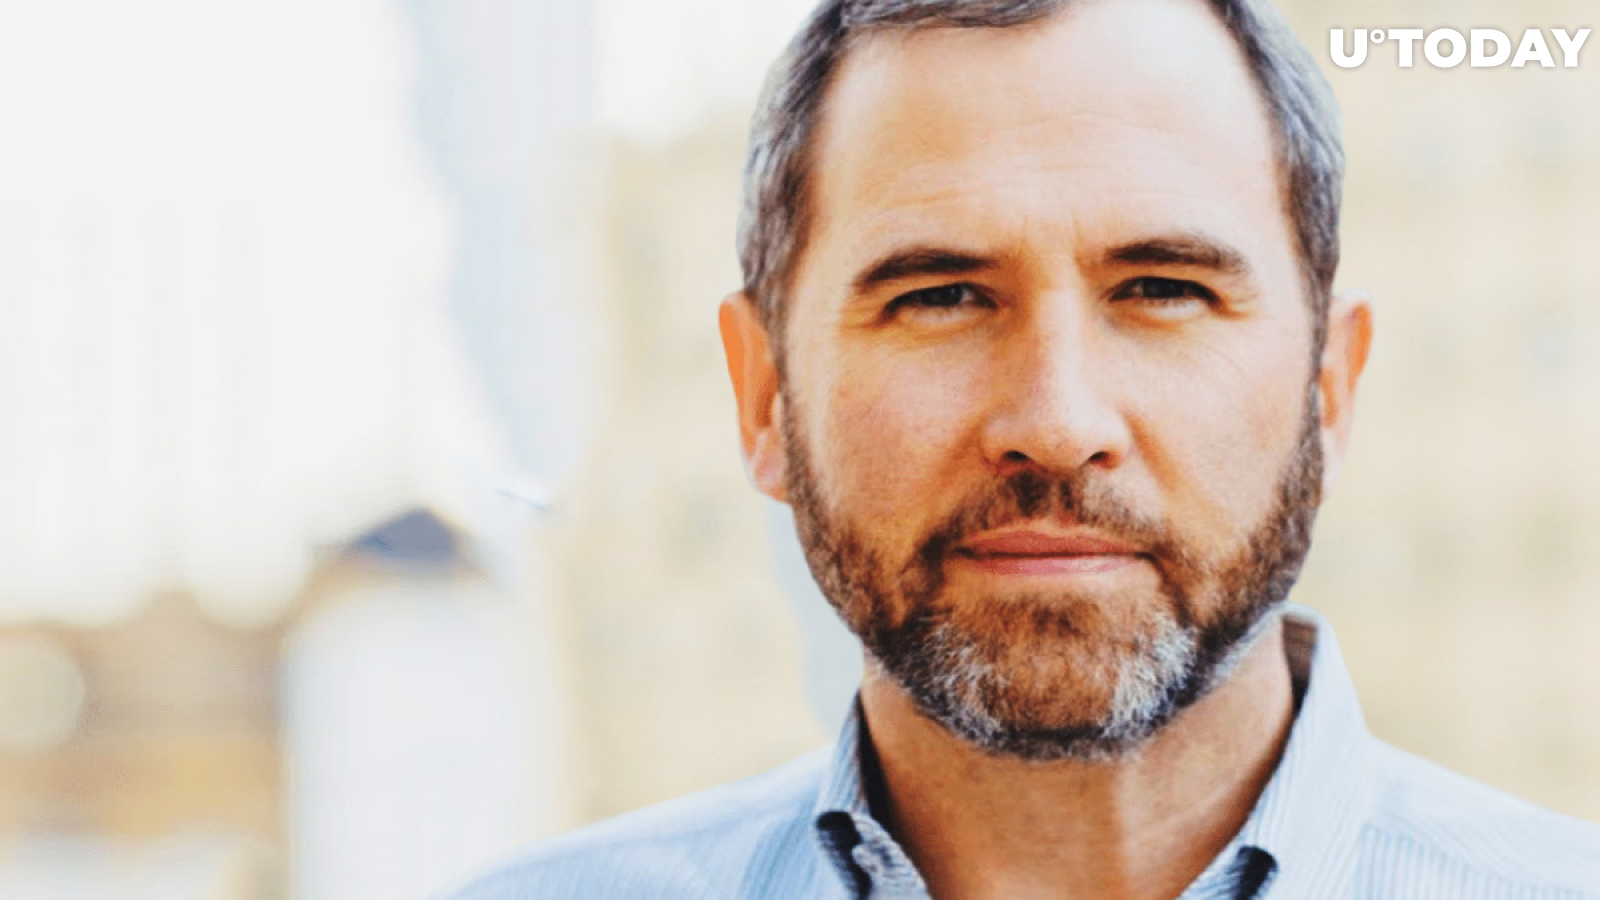 Ripple CEO Brad Garlinghouse Reveals Company's Q1 Results in New Video: Watch